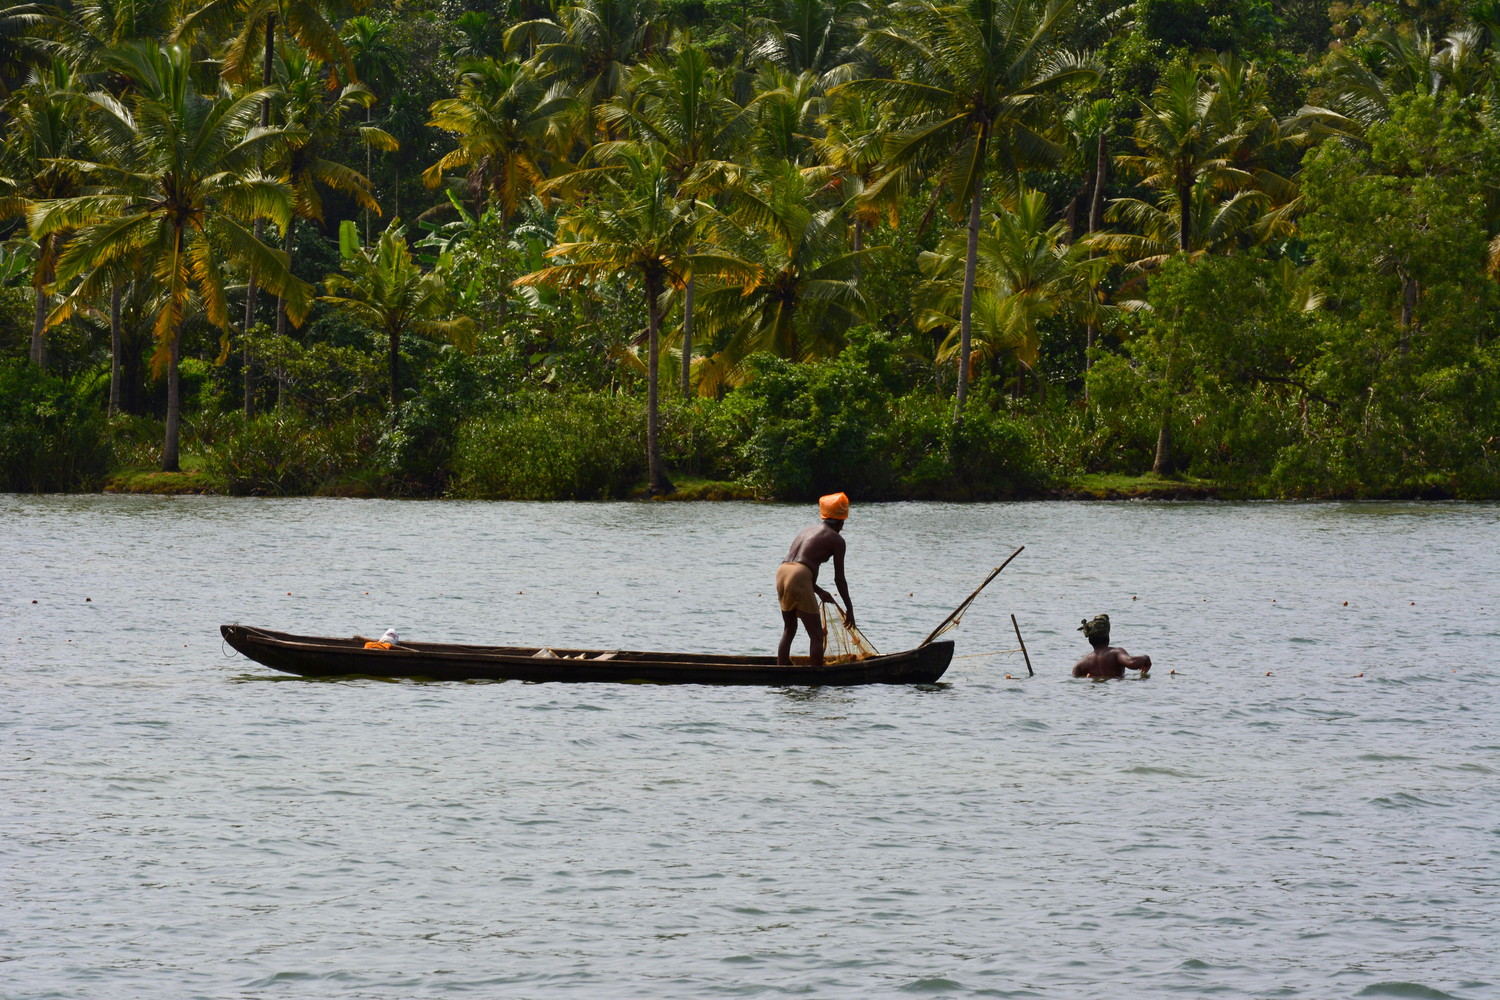 Two fishermen at work in a lake: one standing on a boat pulling a fishing net and the other in water with his body partially submerged